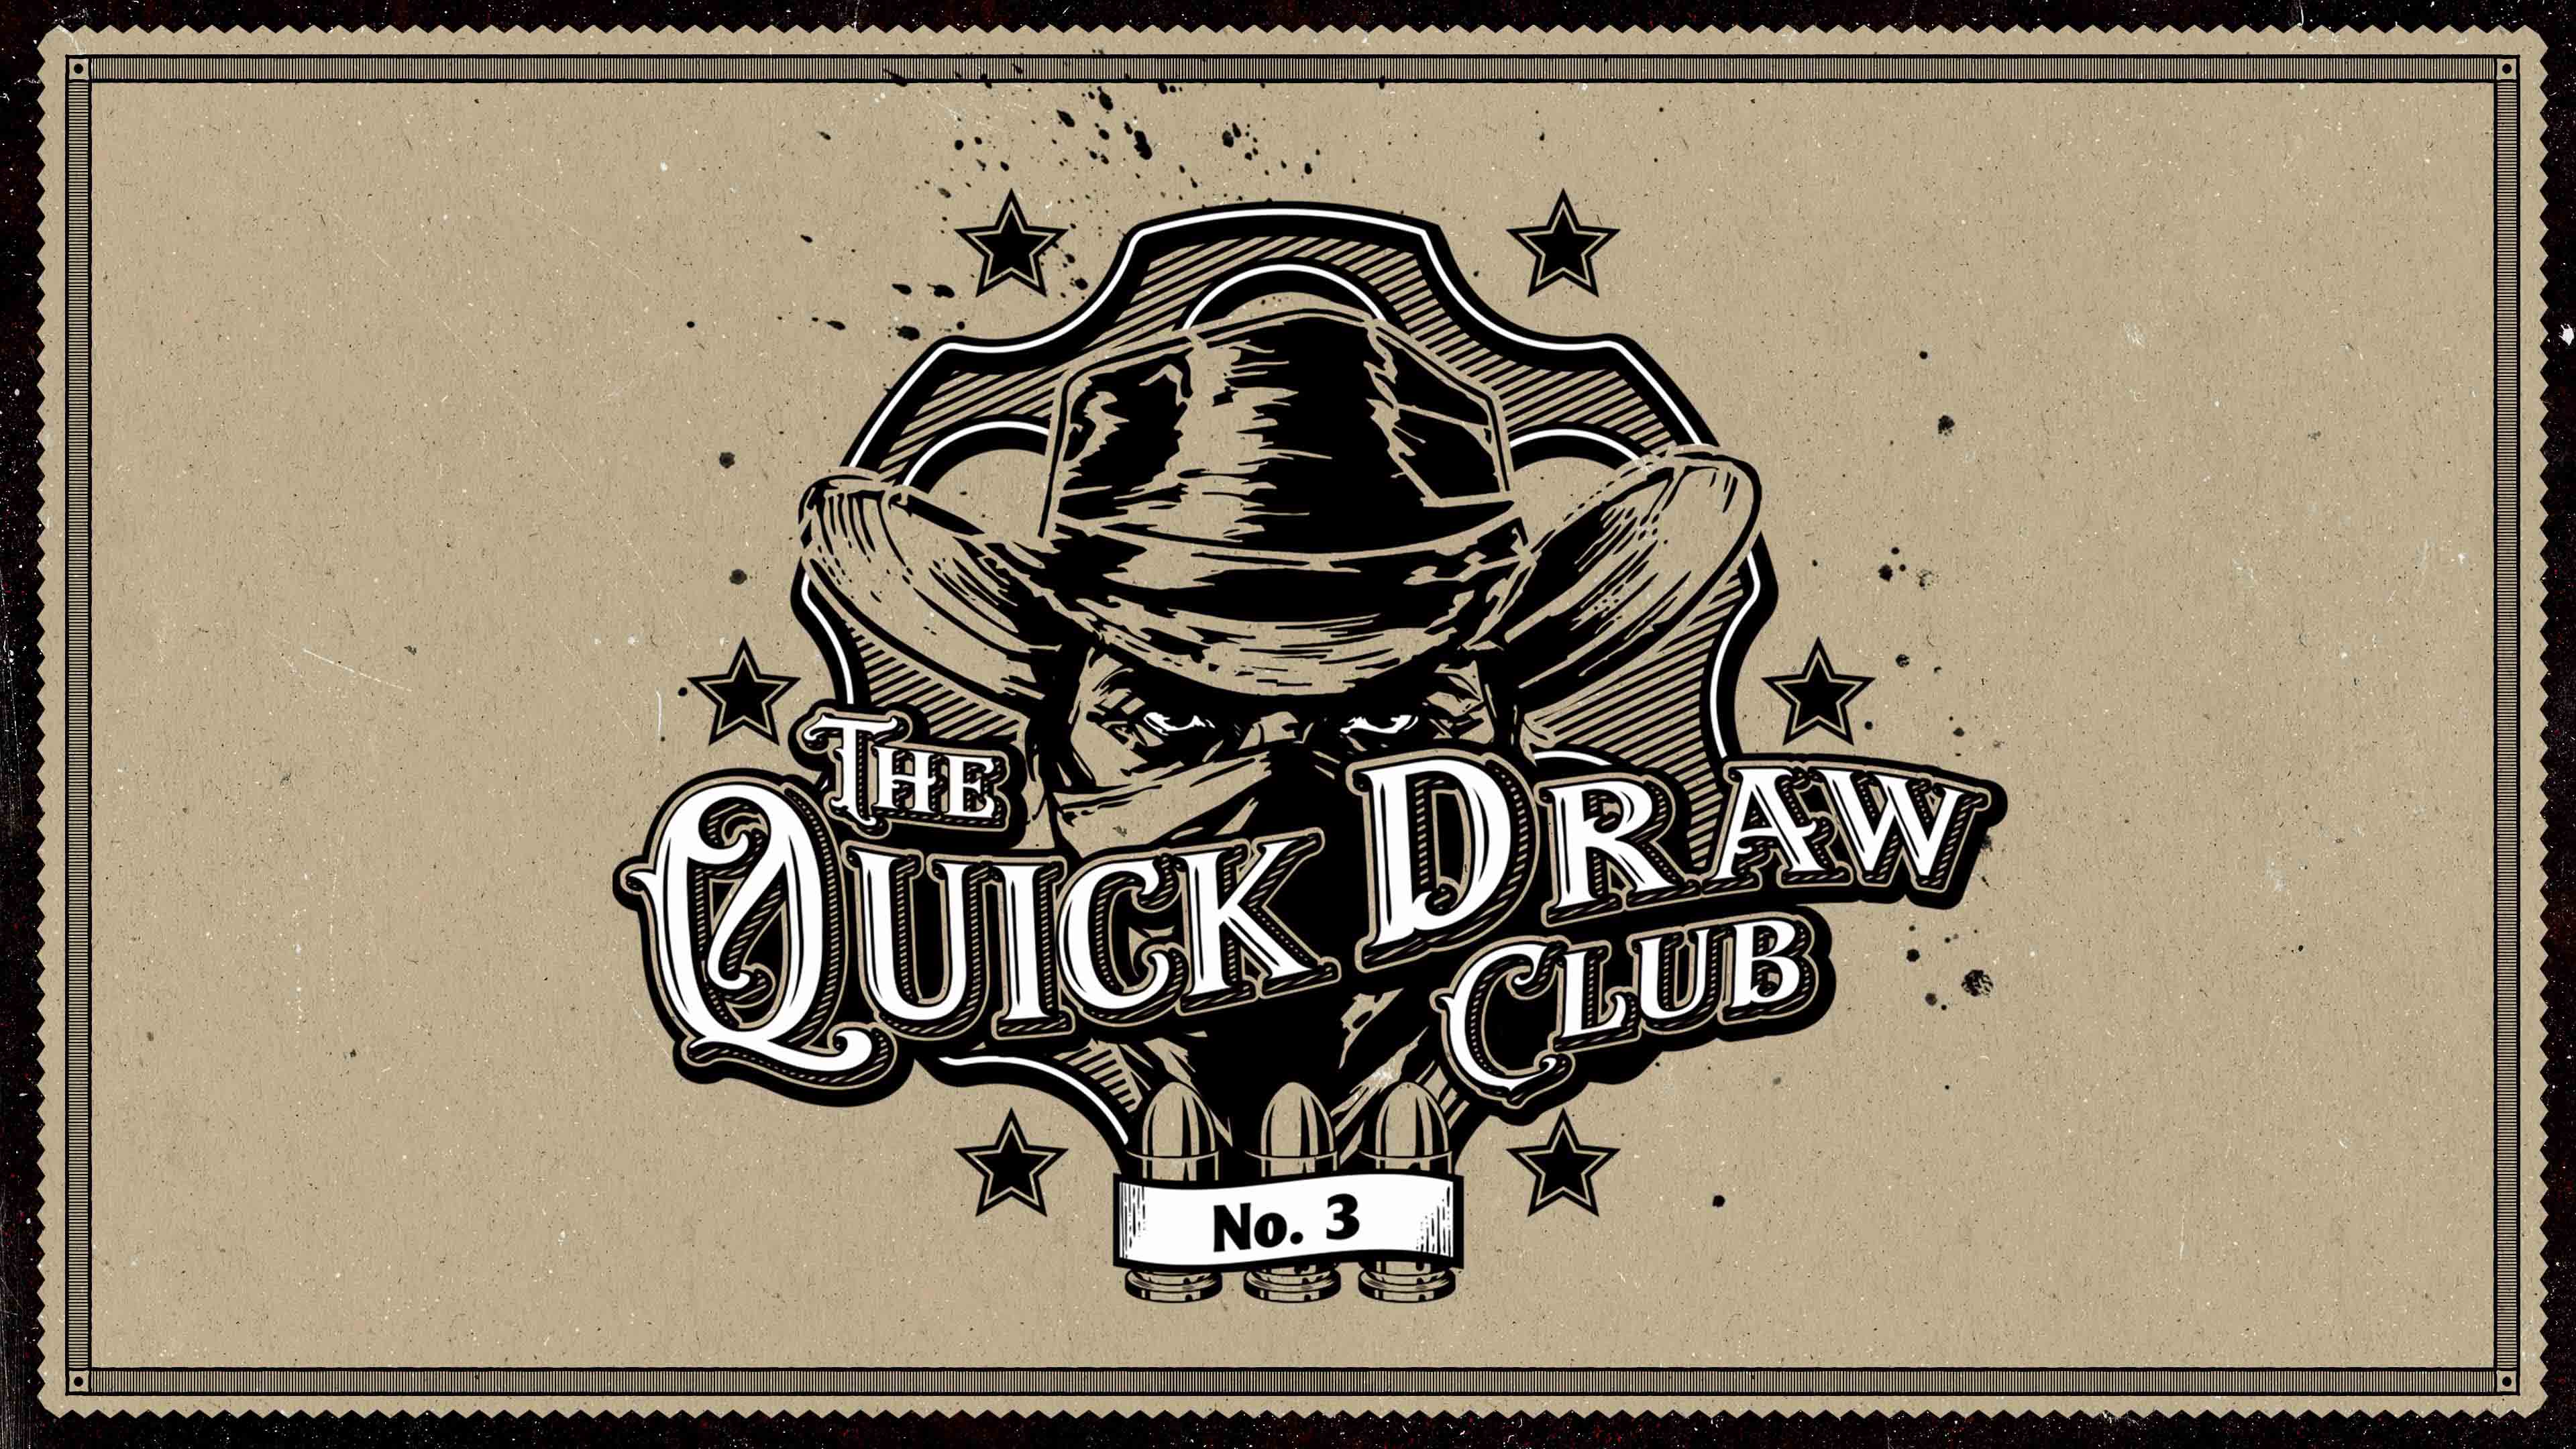 Red Dead Online: The Quick Draw Club No. 3 Now Available, Bonuses &amp; more